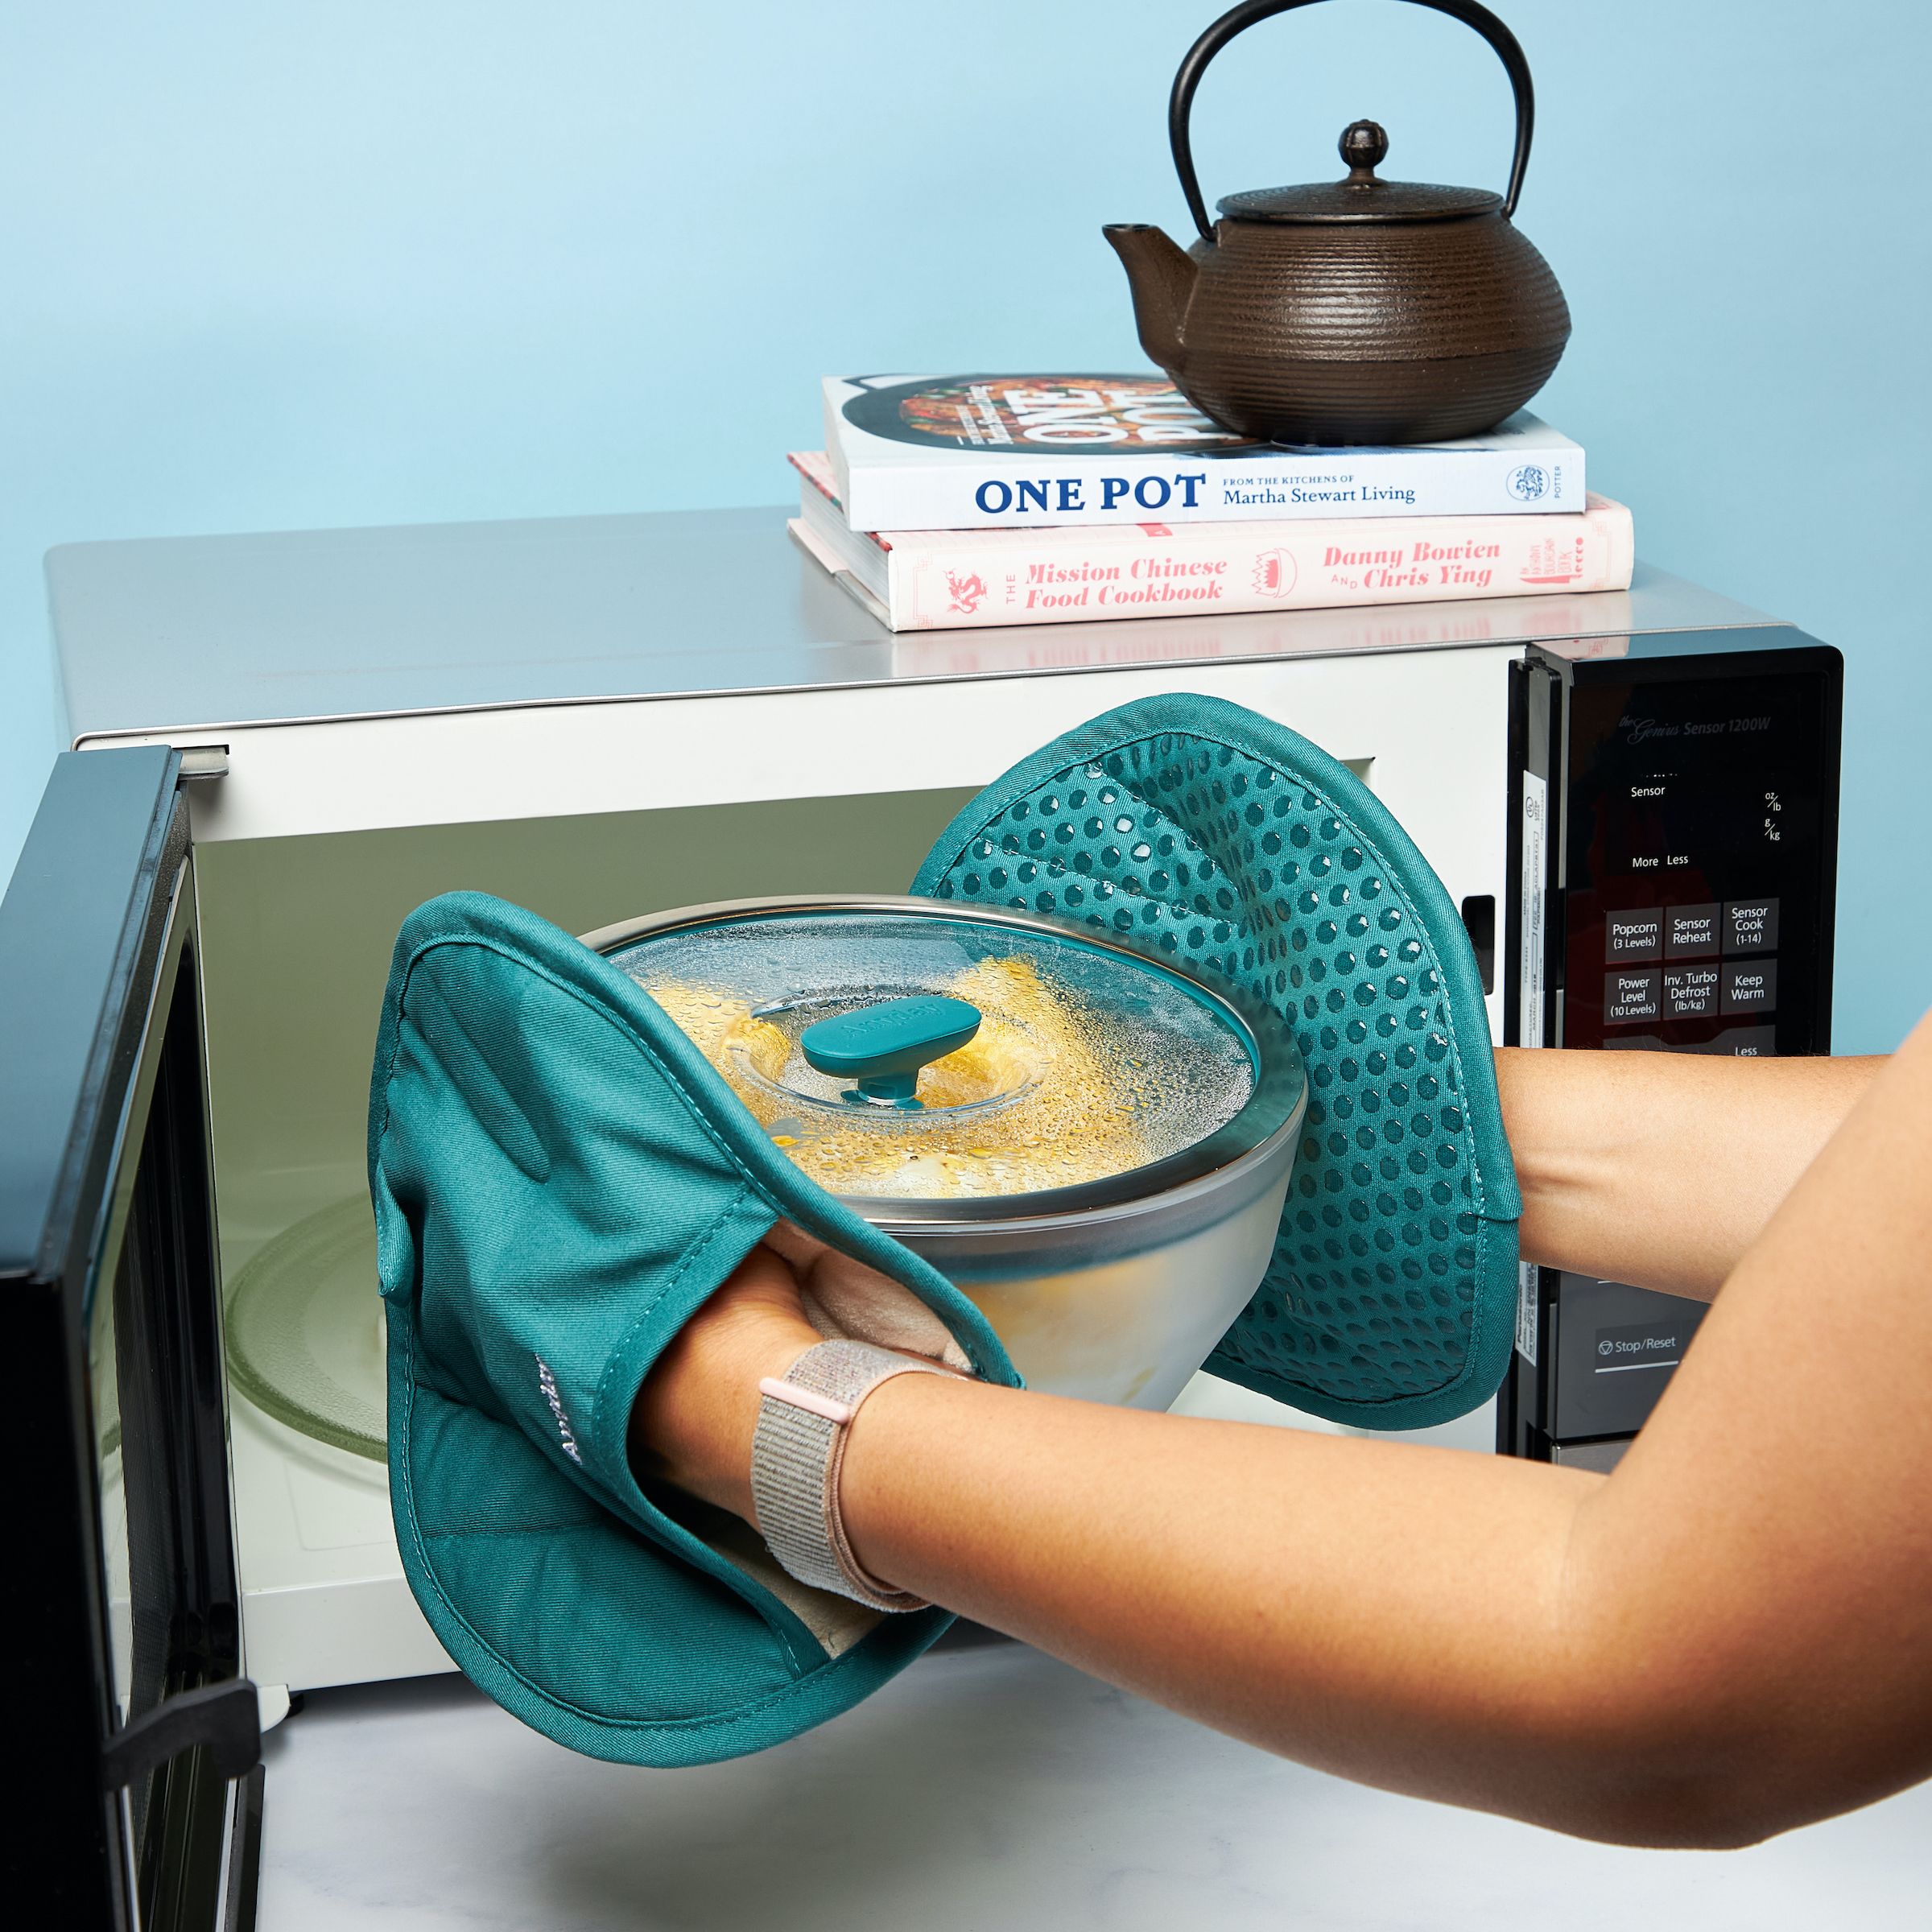 Anyday's Microwaveable Cookware Is Your New Kitchen Staple